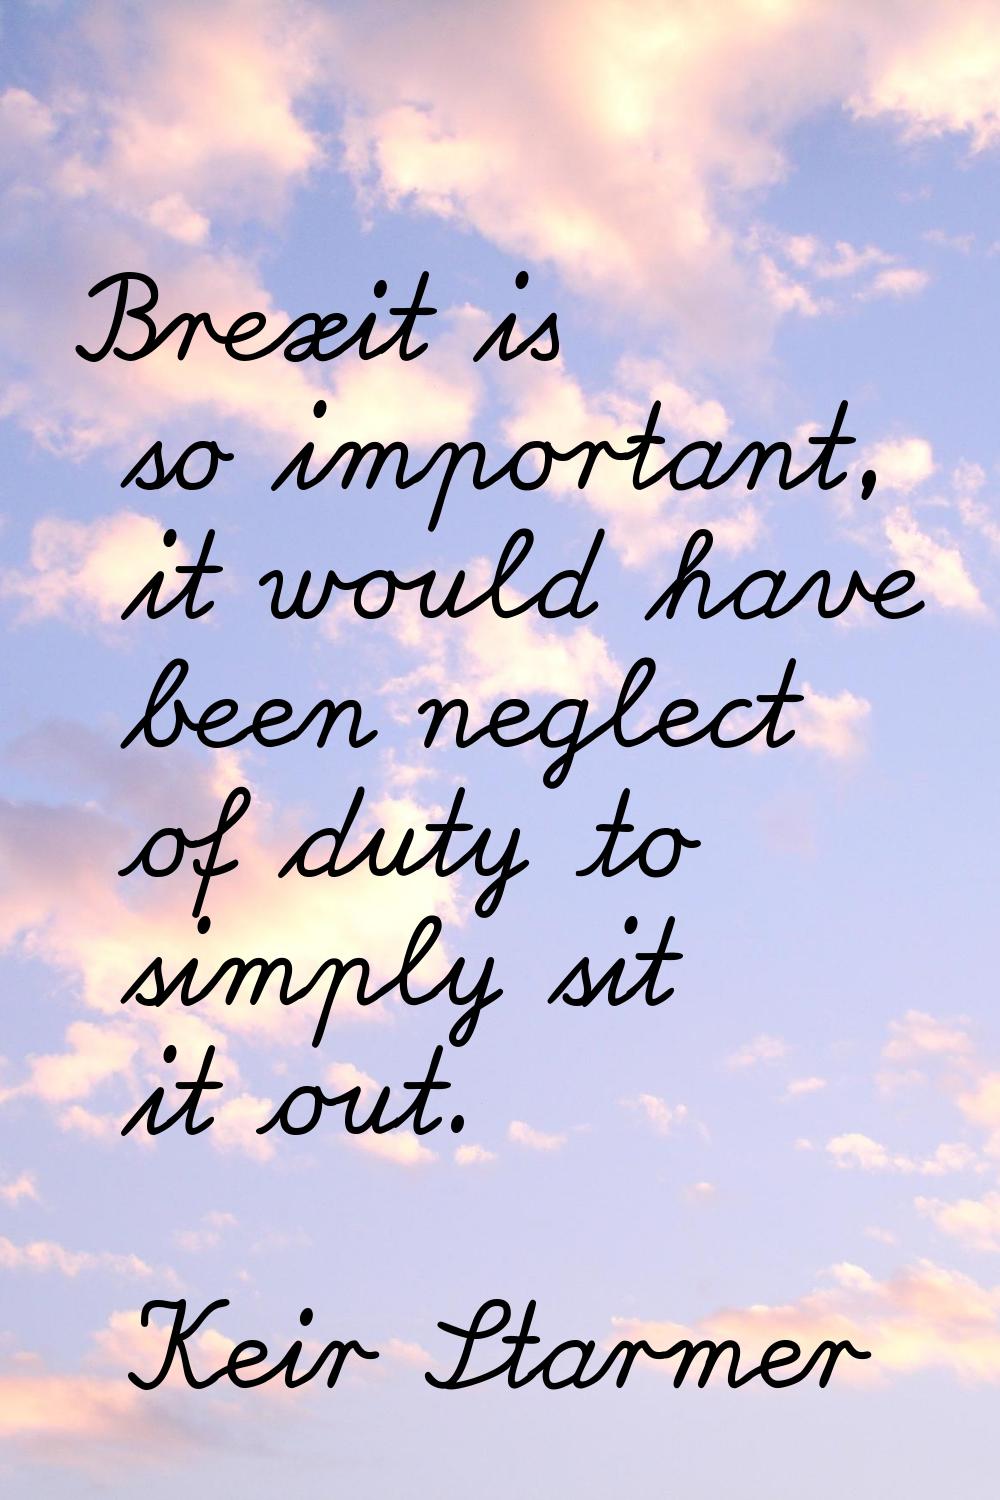 Brexit is so important, it would have been neglect of duty to simply sit it out.